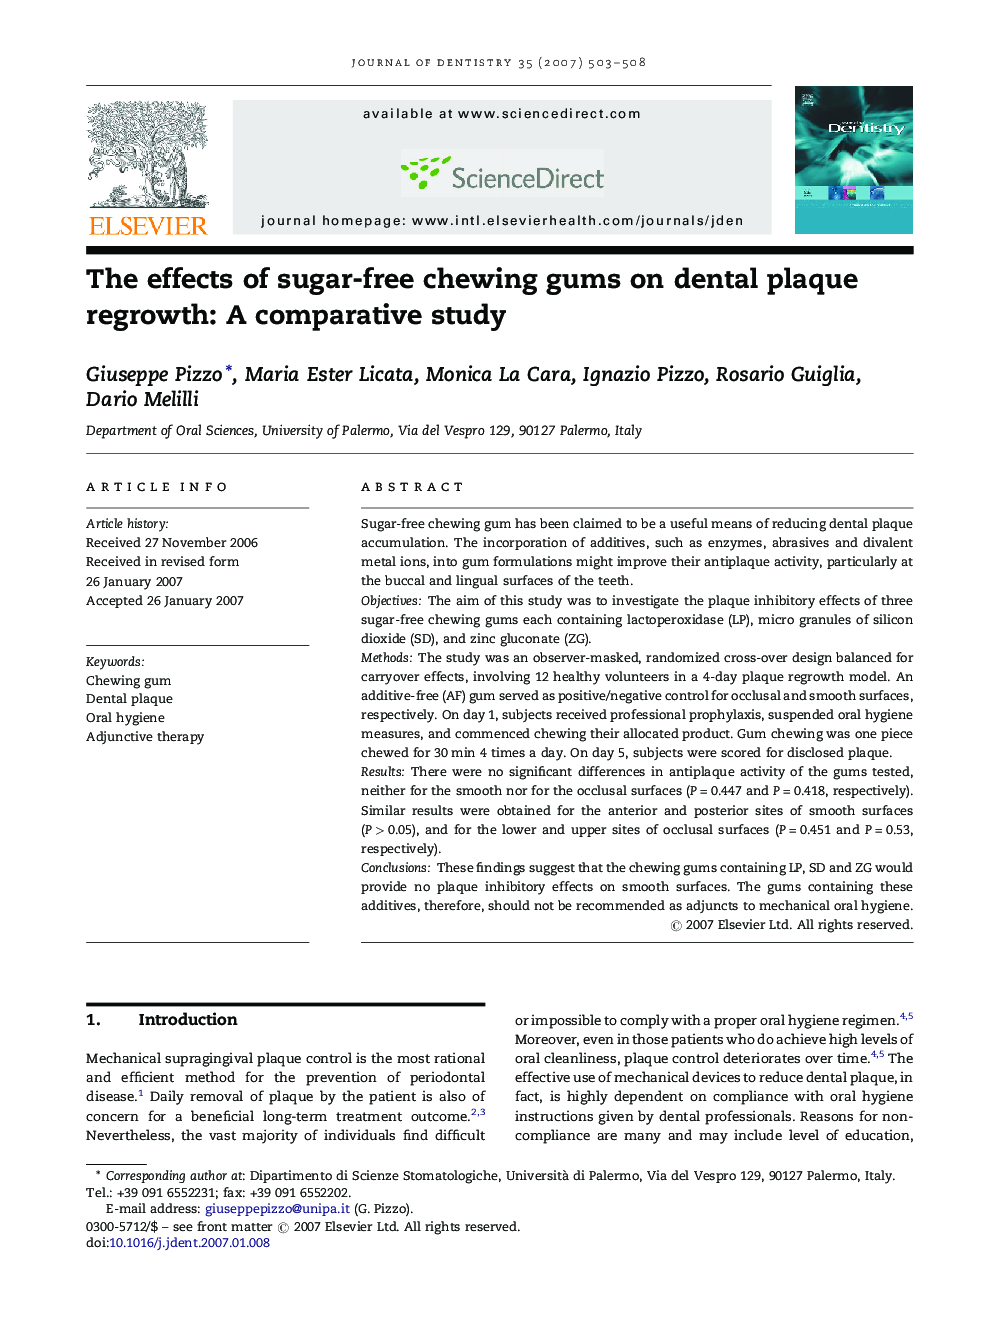 The effects of sugar-free chewing gums on dental plaque regrowth: A comparative study